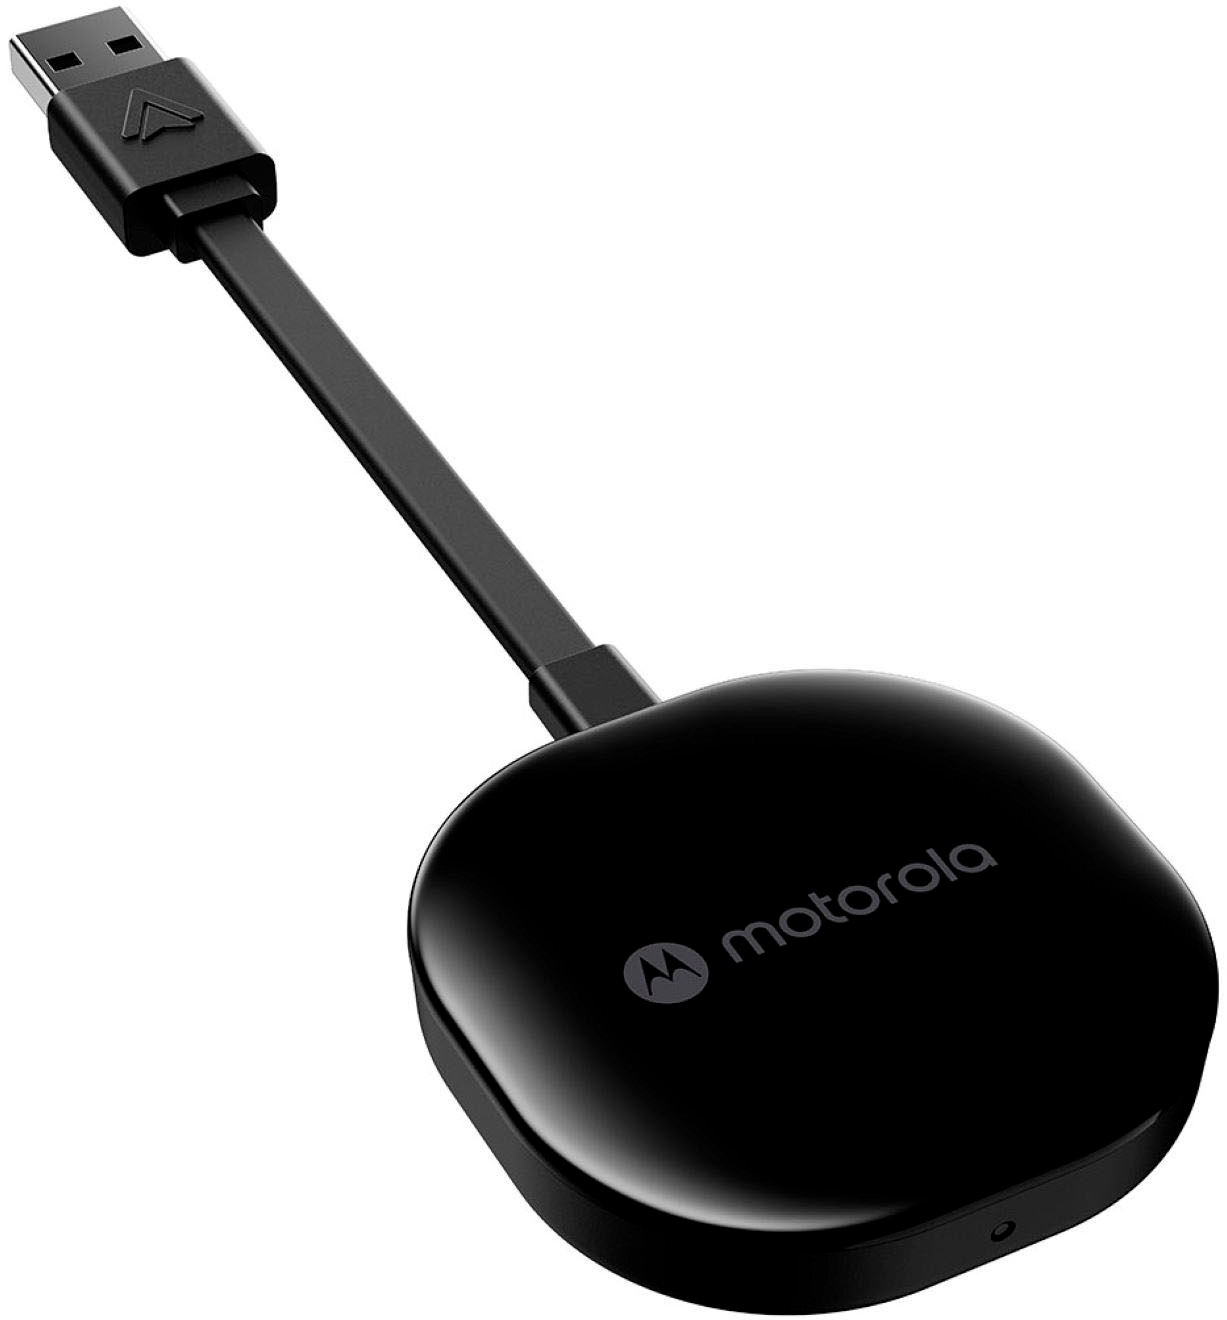 Motorola MA1 wireless motorcycle/car adapter for Android Auto.